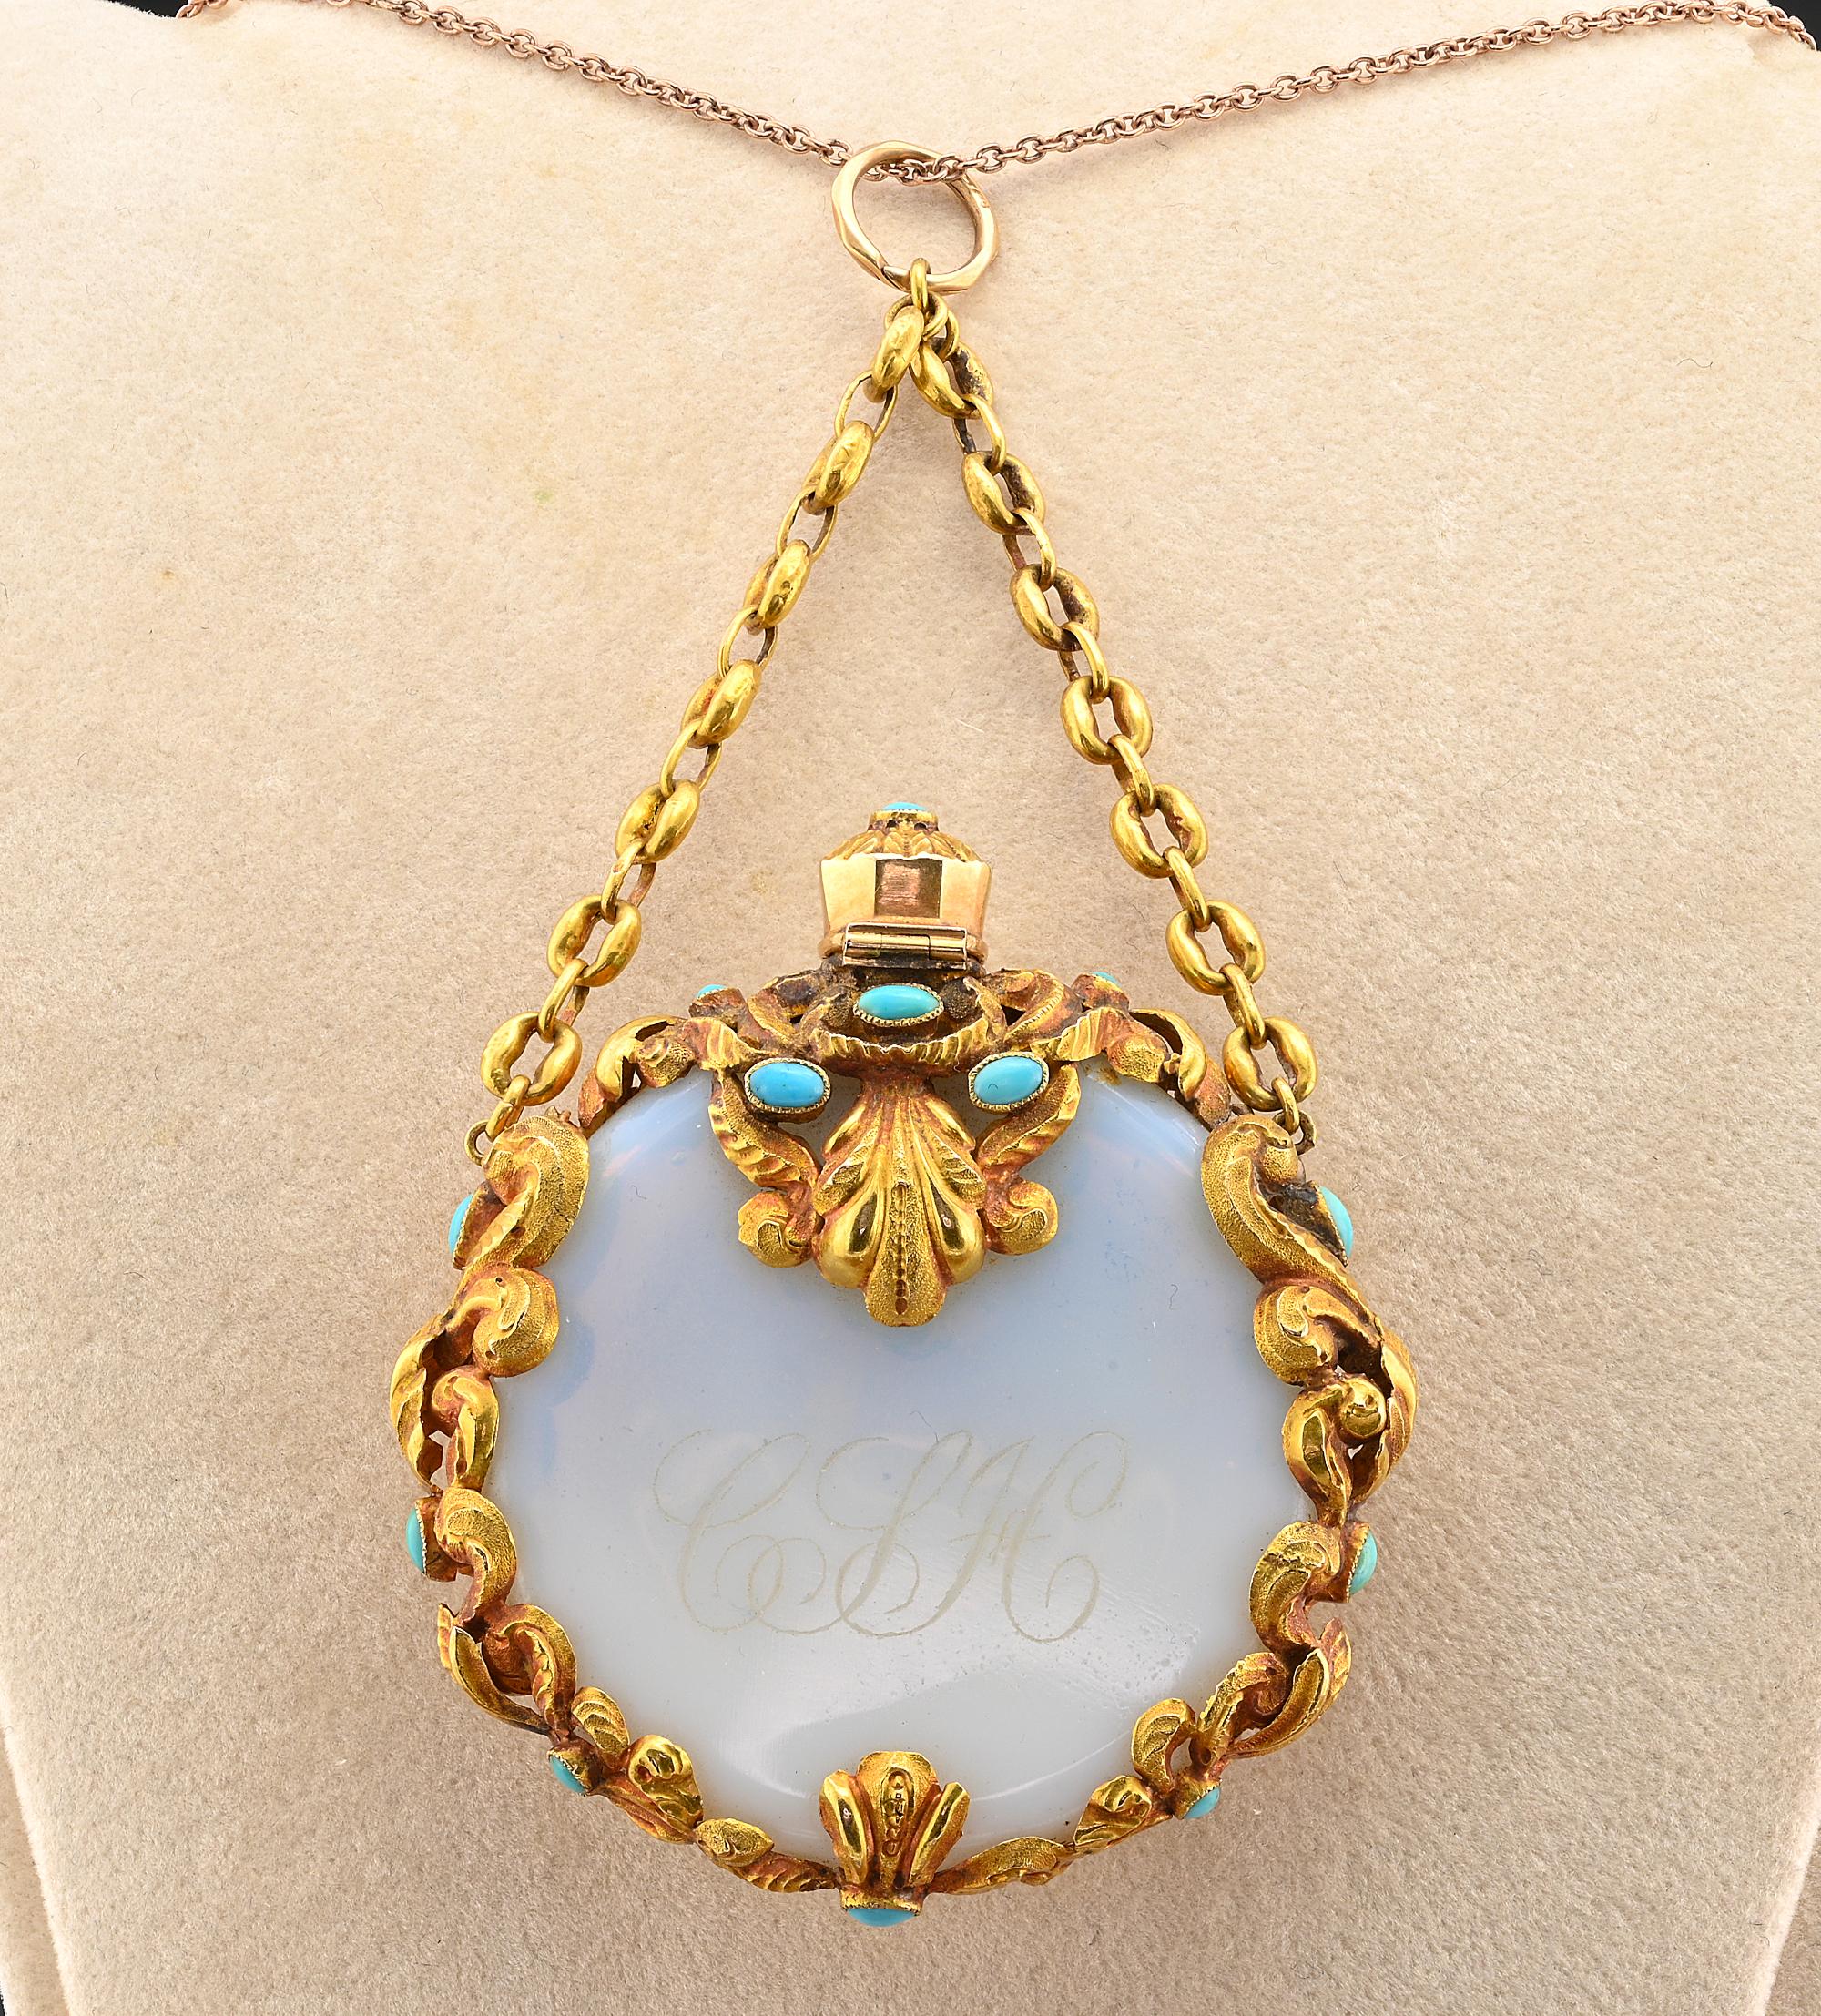 Rare beautiful Regency period 1820 circa antique scent bottle pendant
Fascinating Opaline Azure color with engraved Monogram letters, rarely decorated in 15 Ct solid gold with fantastic scrolls and carvings, embellished with natural